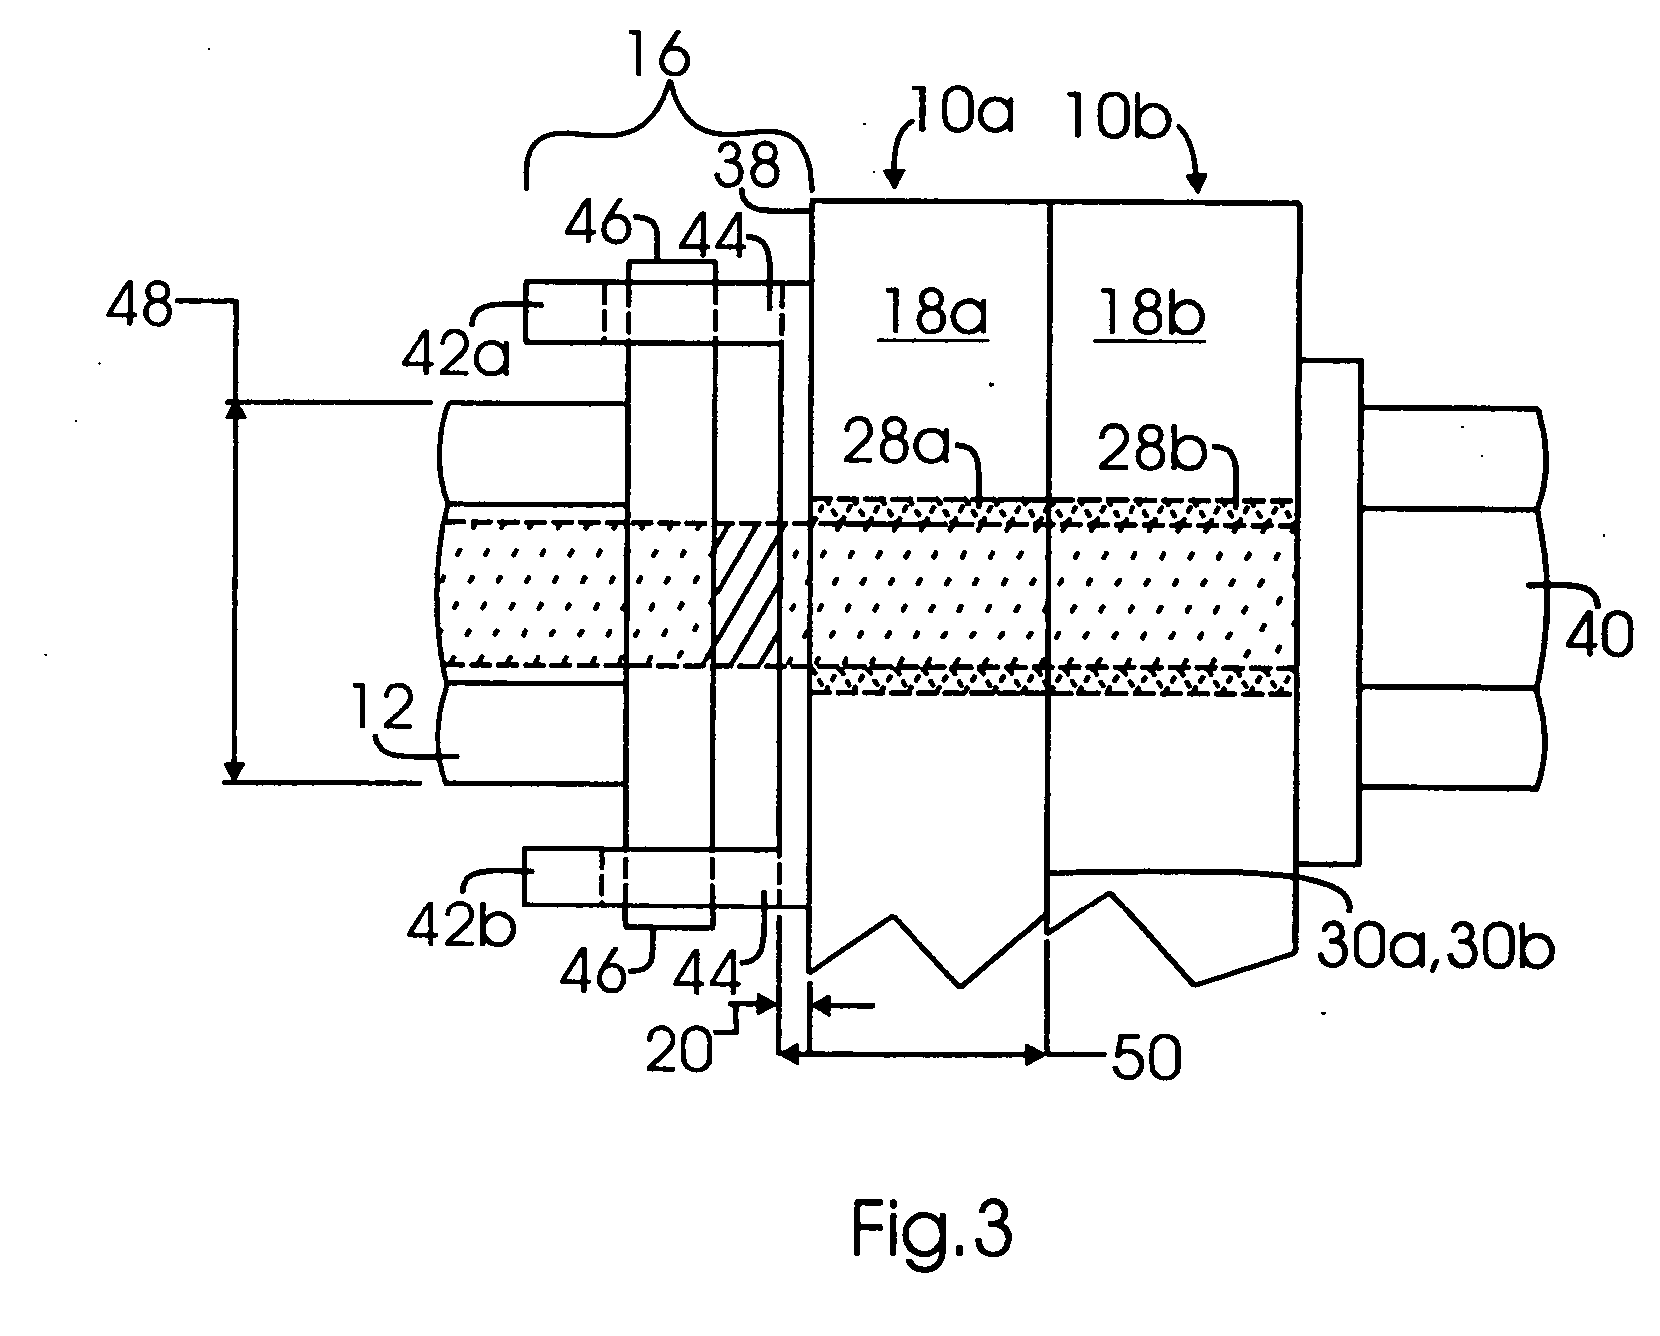 Built-in attachment device using selective laser sintering